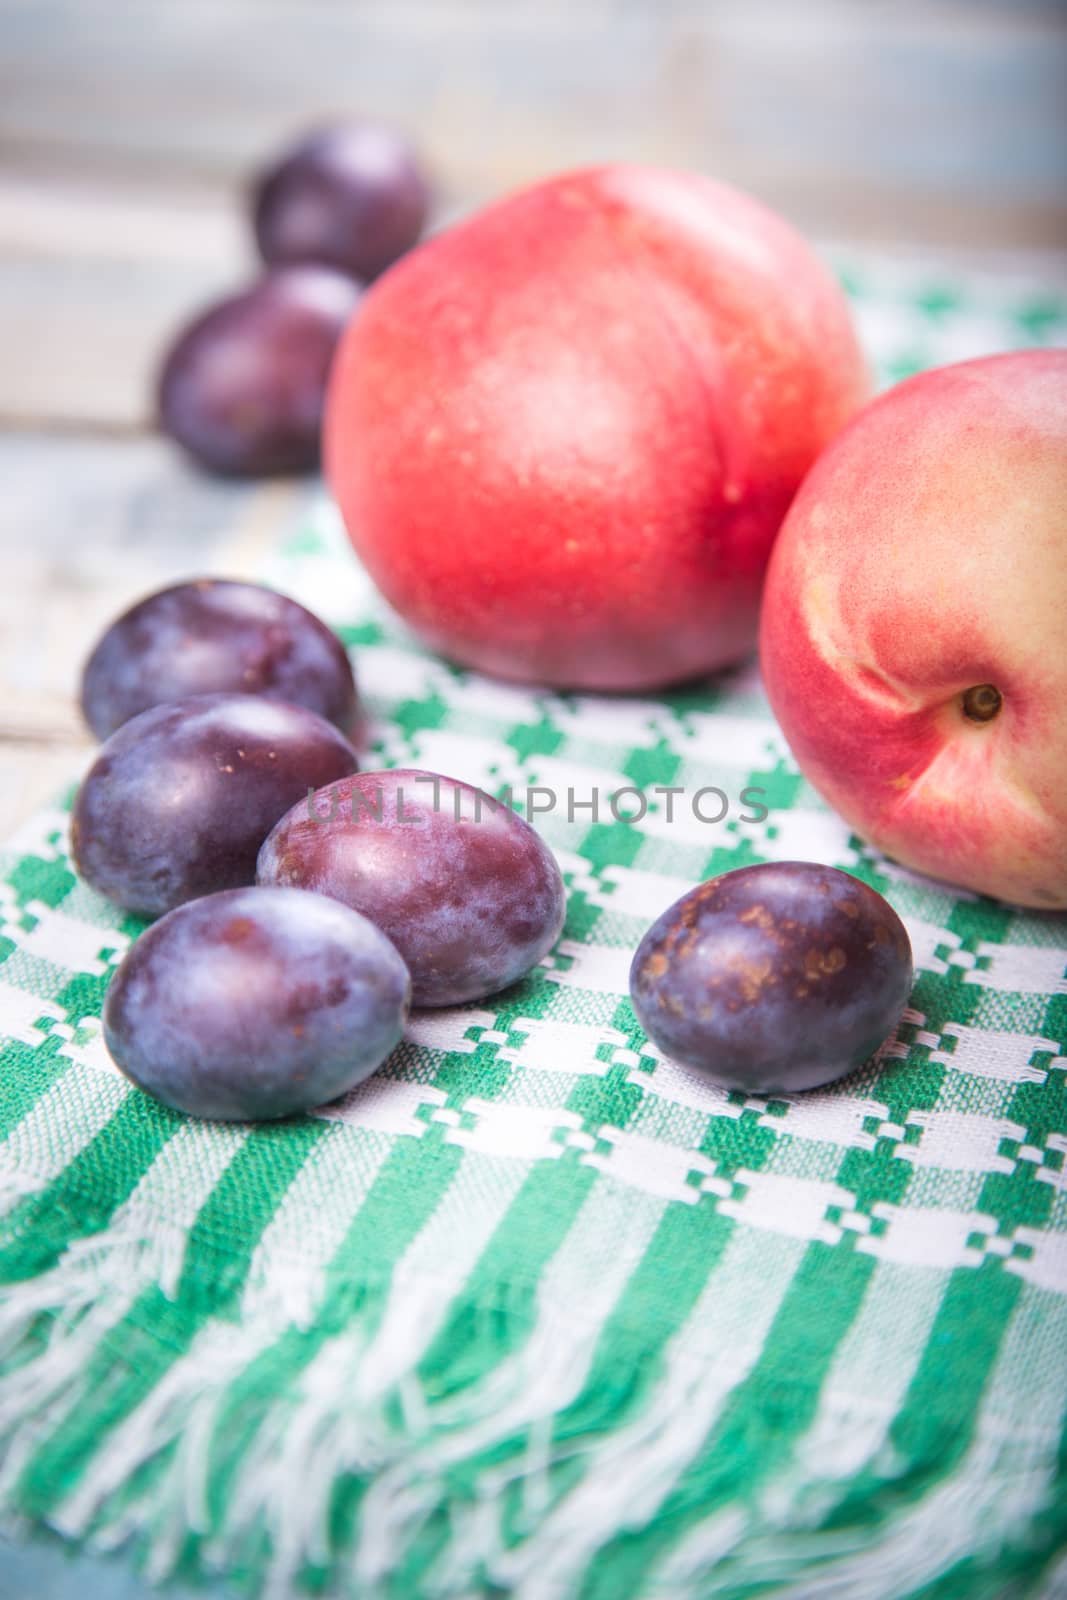 nectarins and plums by pil76